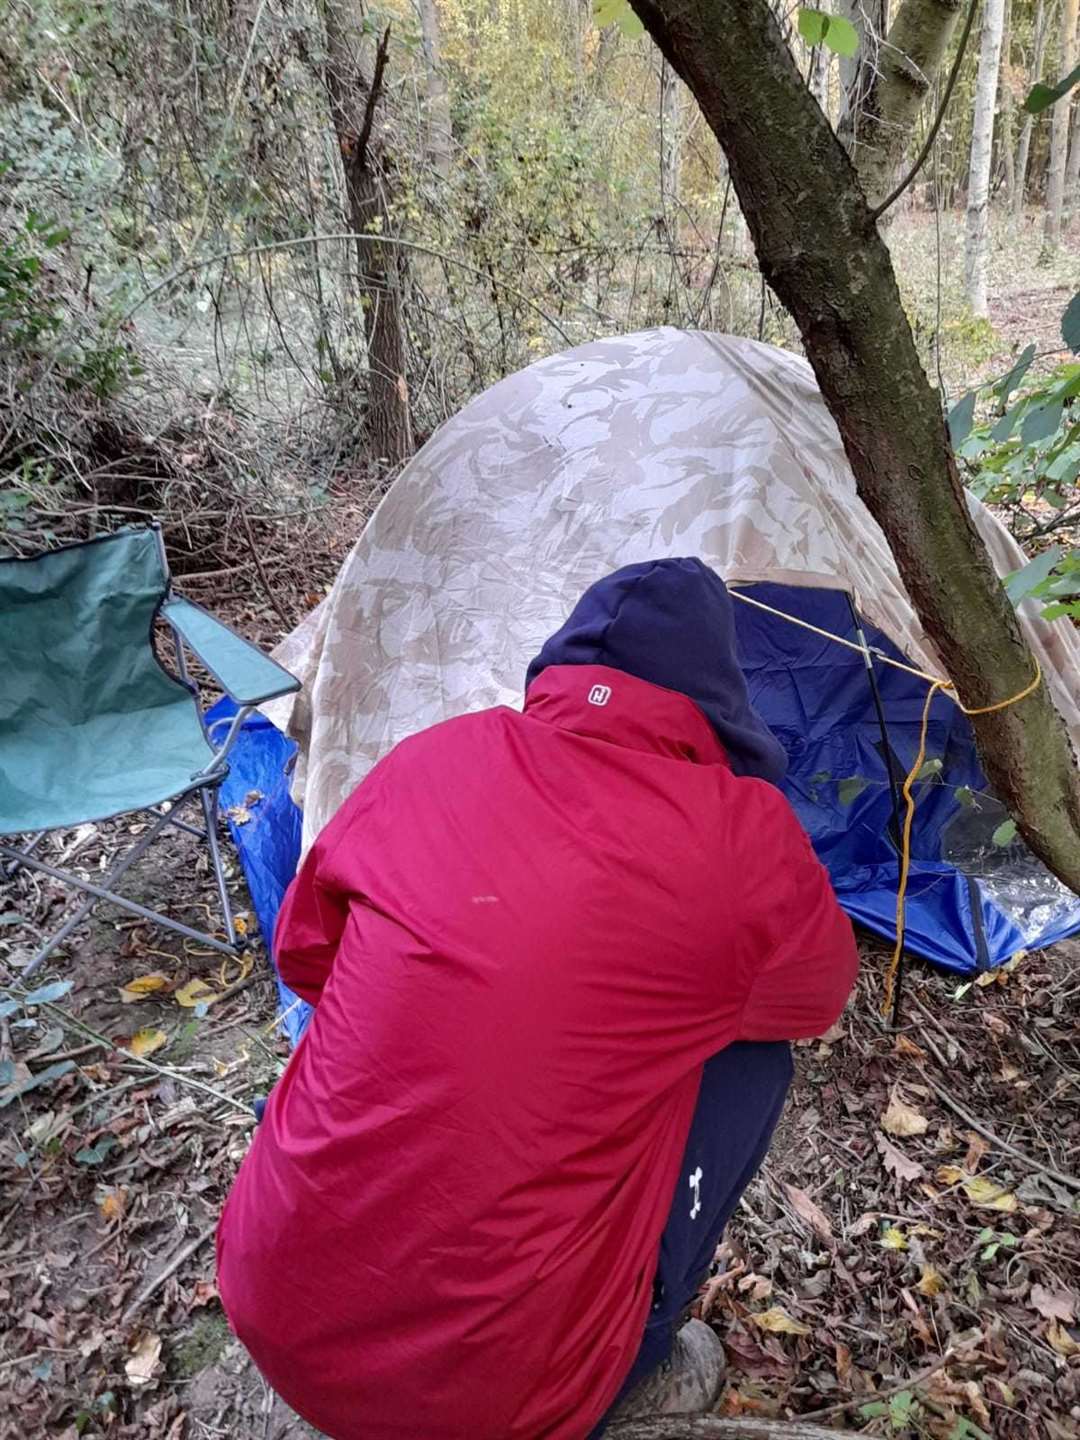 Neil is living in fear after the attack on his tent